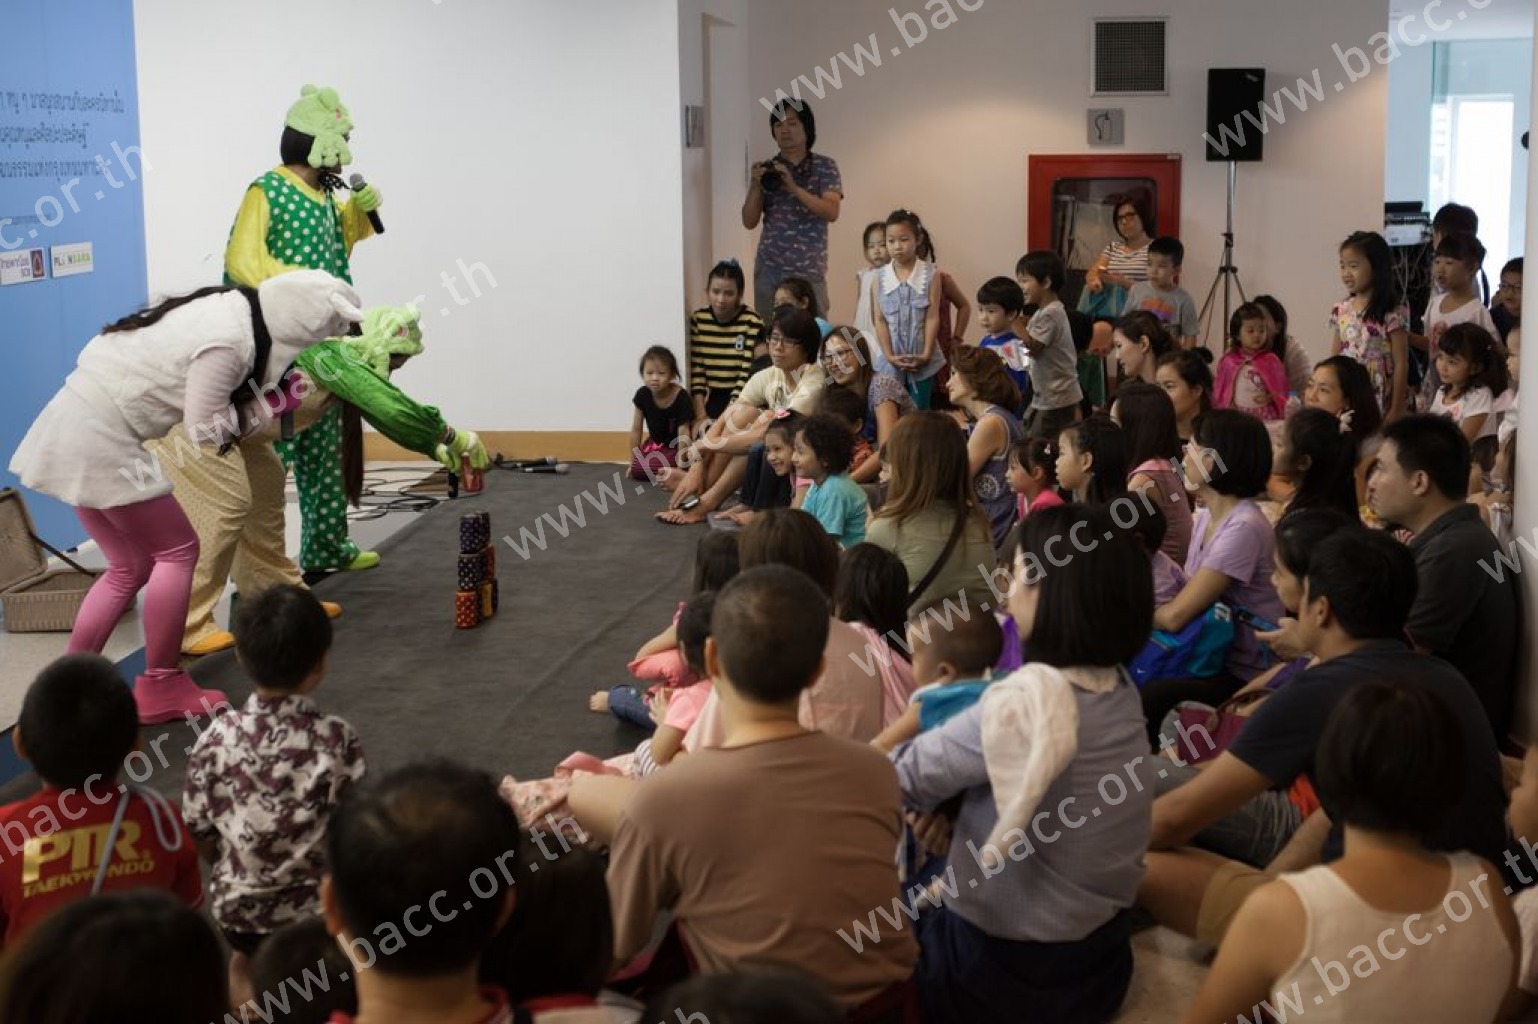 Storytelling Activity for Kids “The Arrogant Frog and the Humble Frog”